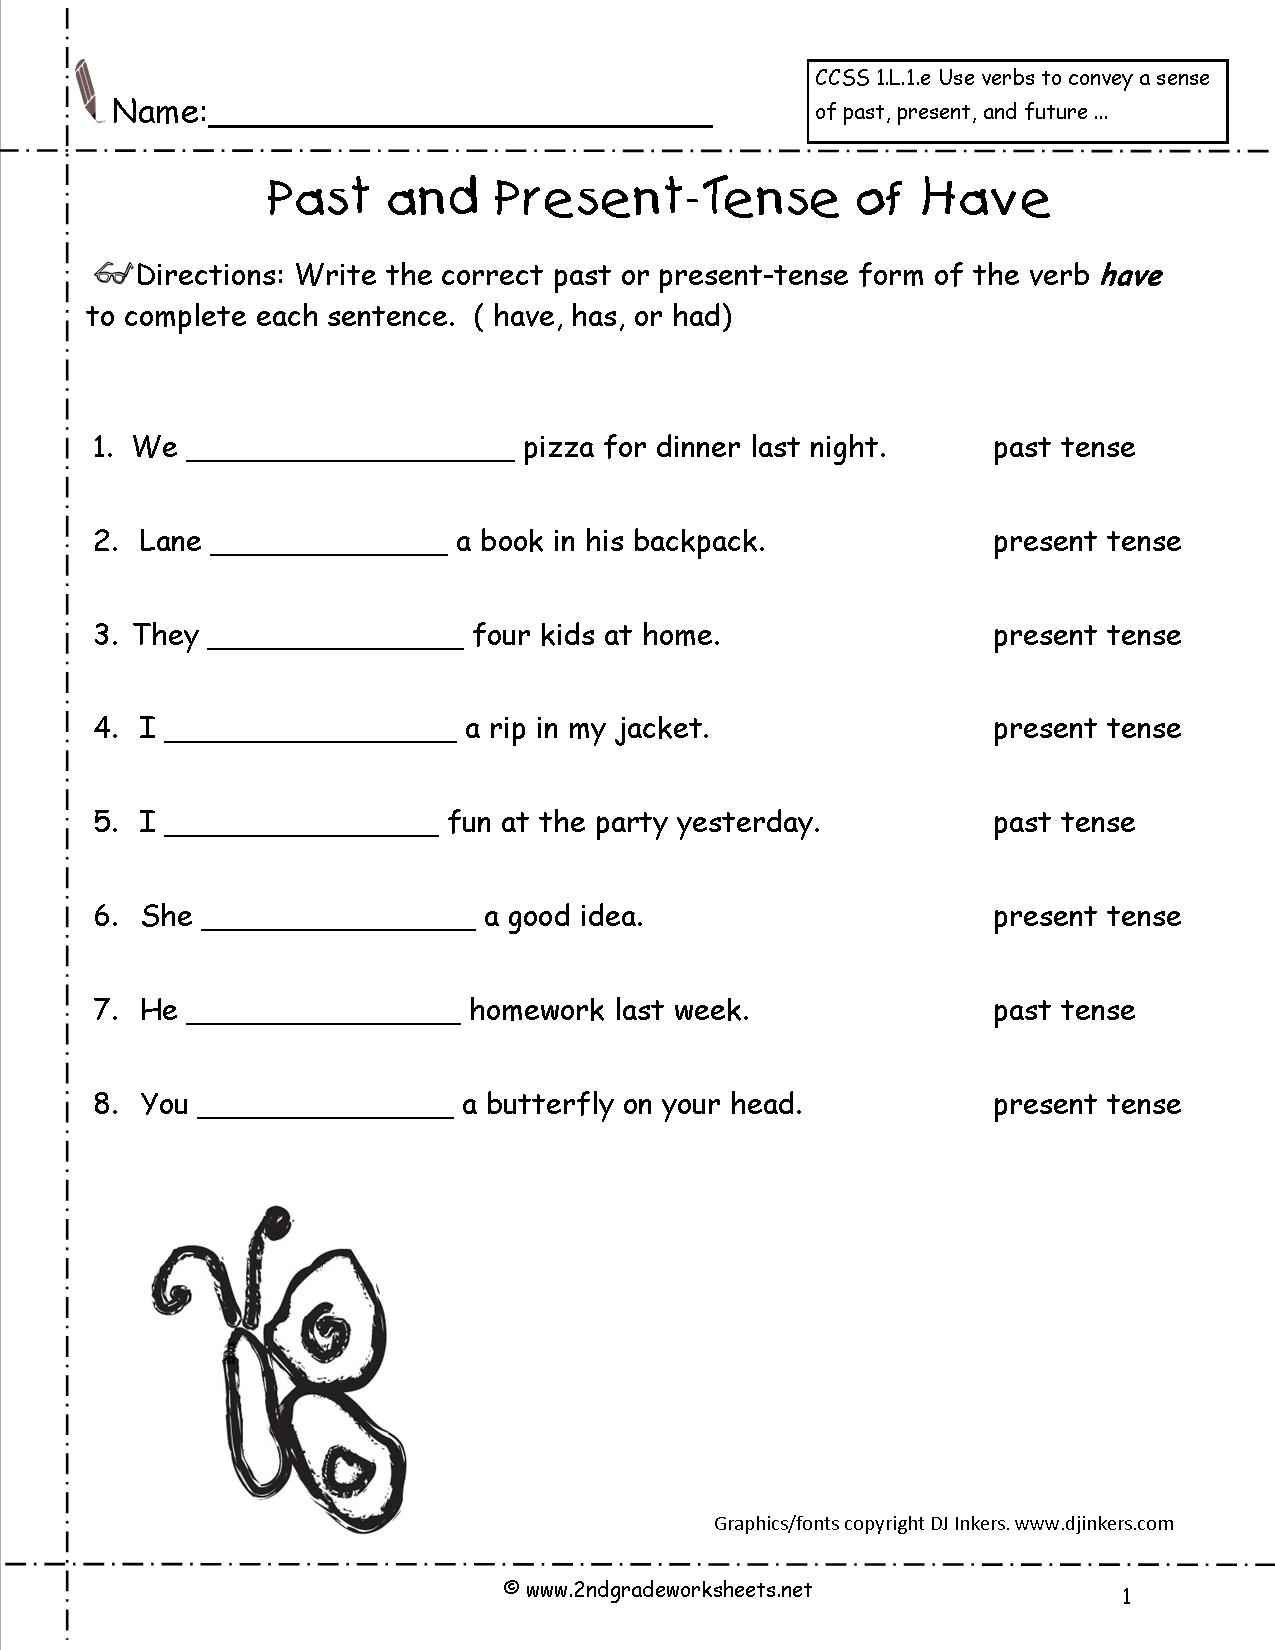 16-best-images-of-past-tense-verbs-worksheets-2nd-grade-regular-verbs-past-tense-regular-verbs